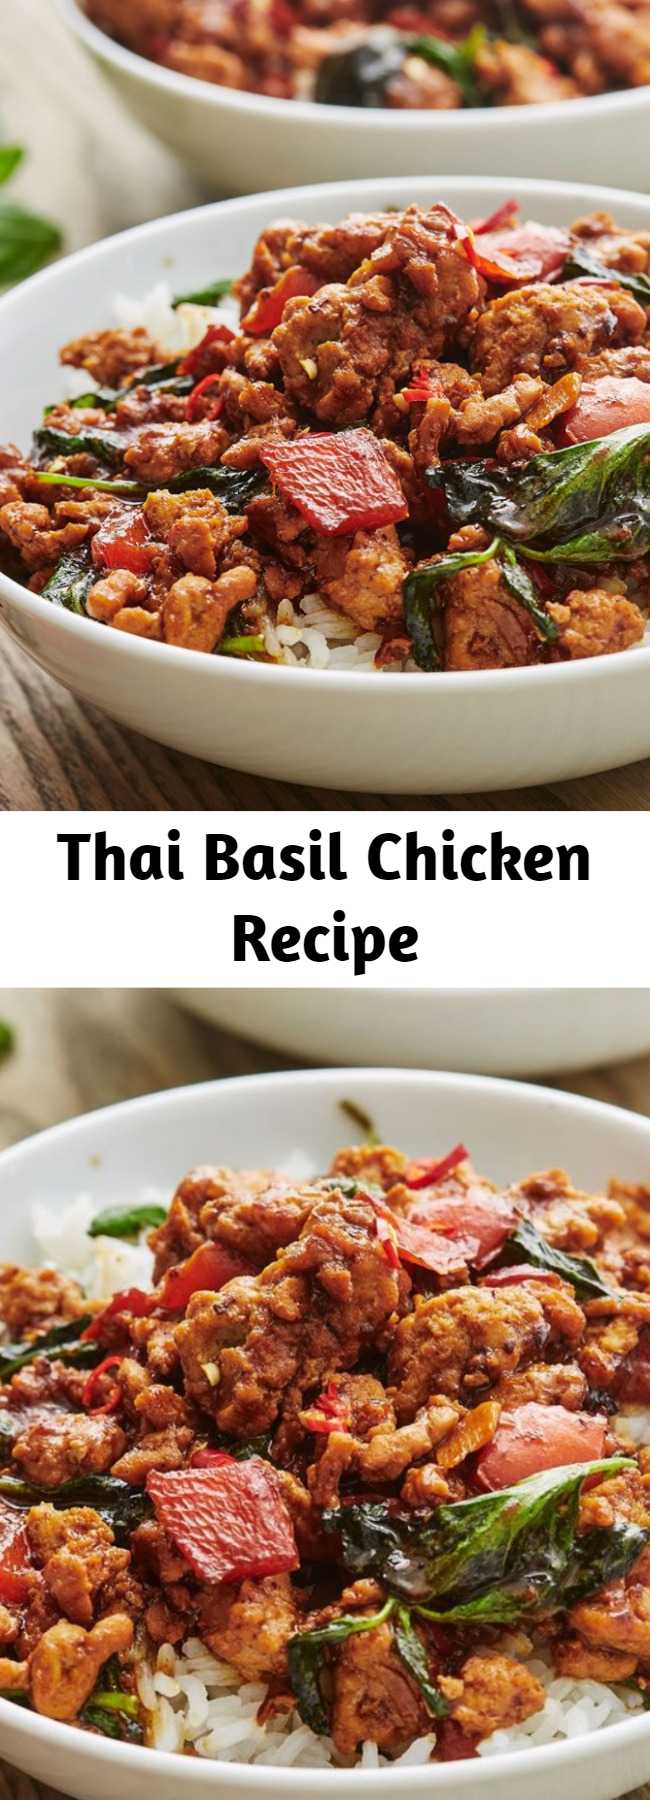 Thai Basil Chicken Recipe - The sauce on this is incredible; don't be anxious about the fish and/or oyster sauces, they lend a bright, salty flavor that isn't fishy at all. Cook up a heaping mound of white rice, spoon a ton of this over the top, and you're set!